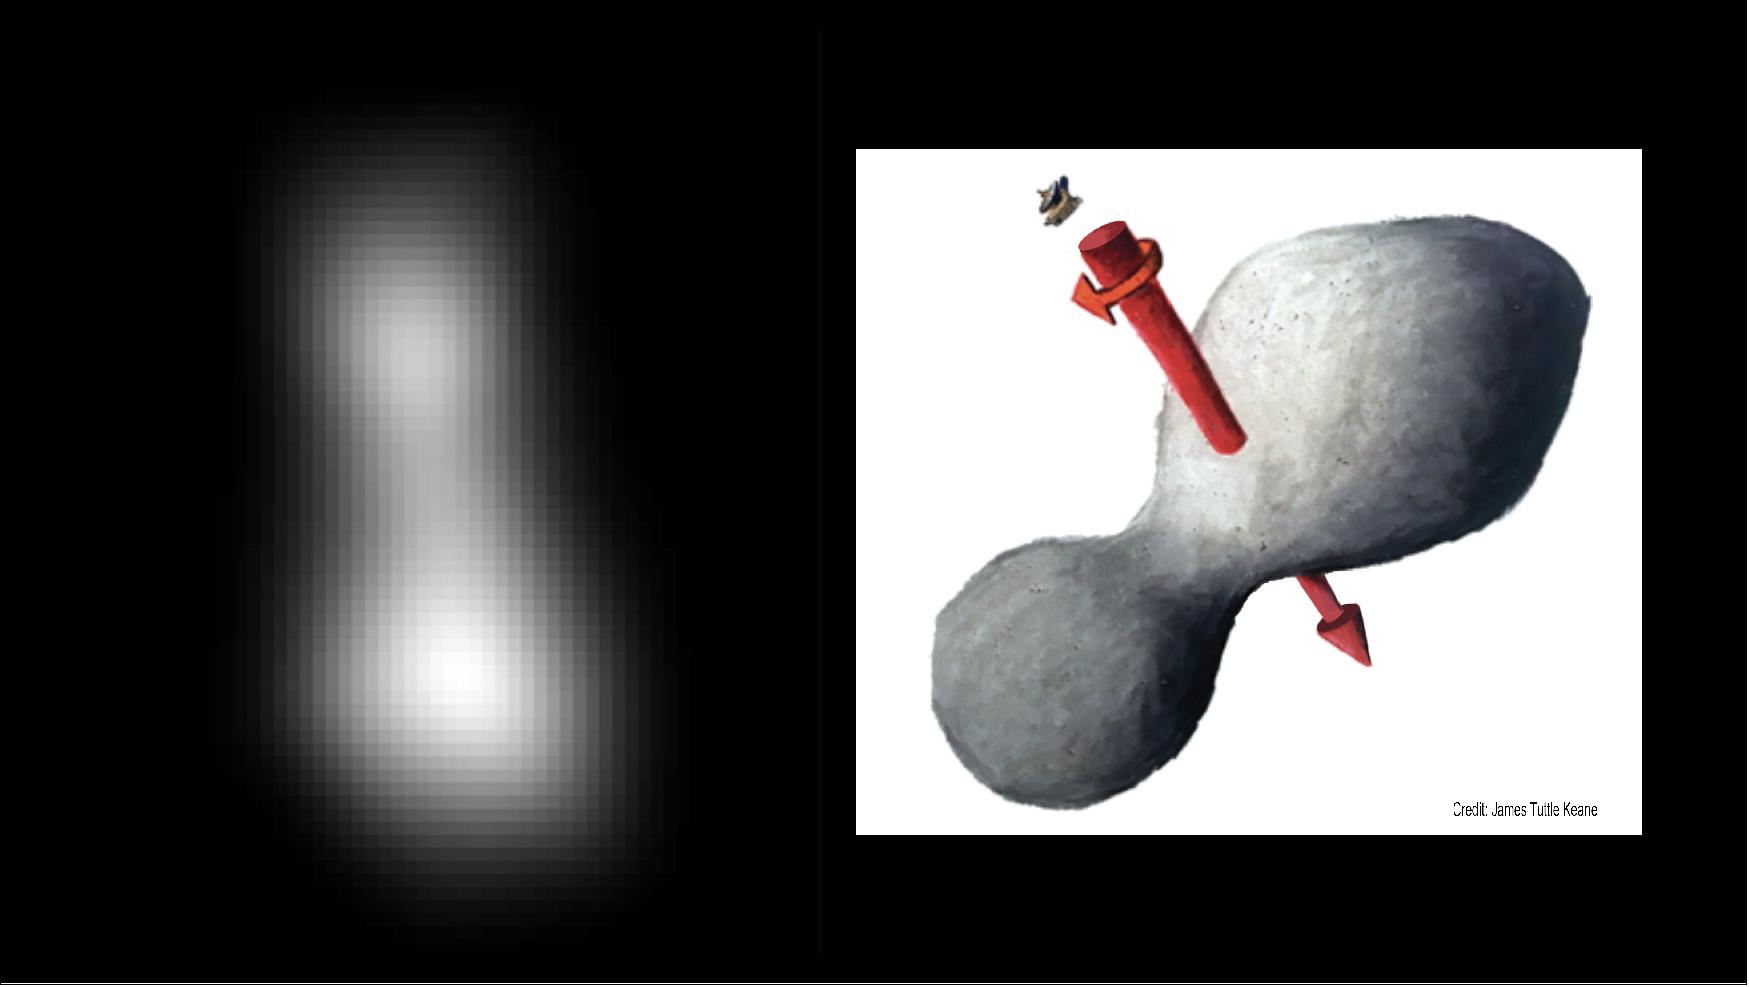 Figure 45: At left is a composite of two images taken by New Horizons' high-resolution Long-Range Reconnaissance Imager (LORRI), which provides the best indication of Ultima Thule's size and shape so far. Preliminary measurements of this Kuiper Belt object suggest it is approximately 20 miles long by 10 miles wide (32 kilometers by 16 kilometers). An artist's impression at right illustrates one possible appearance of Ultima Thule, based on the actual image at left. The direction of Ultima's spin axis is indicated by the arrows (image credit: NASA, JHU/APL, SwRI; sketch courtesy of James Tuttle Keane)